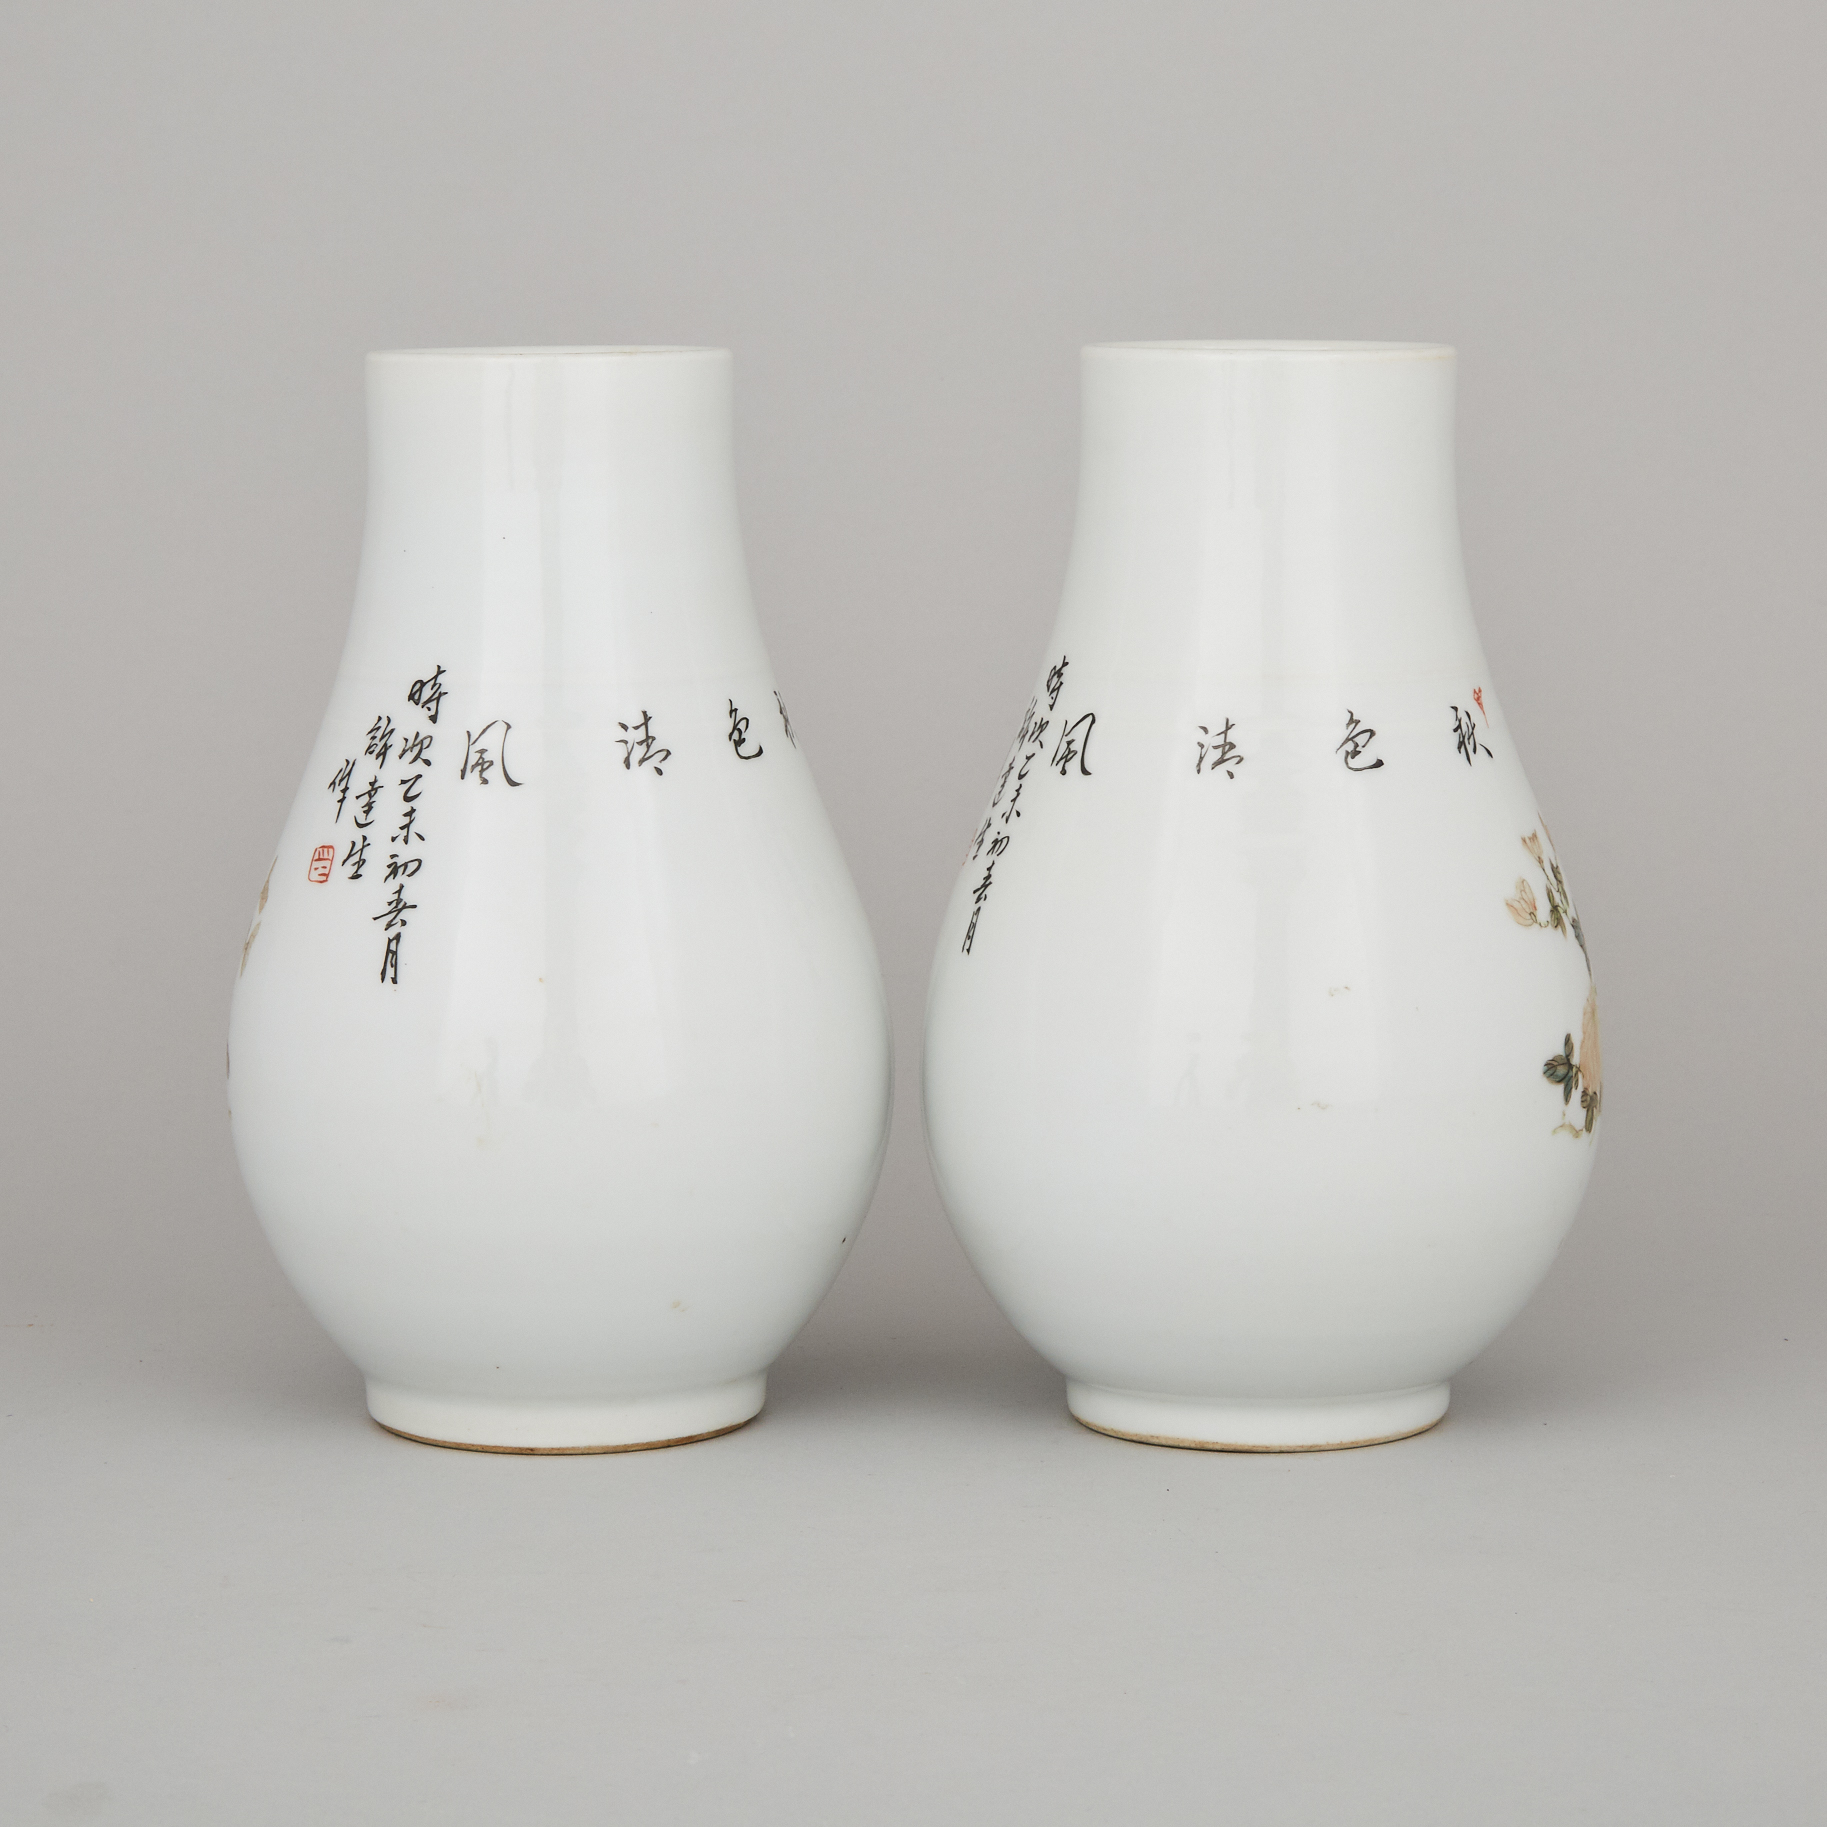 A Pair of Enameled 'Birds and Calligraphy' Vases, Signed Xu Dasheng (1937-?)